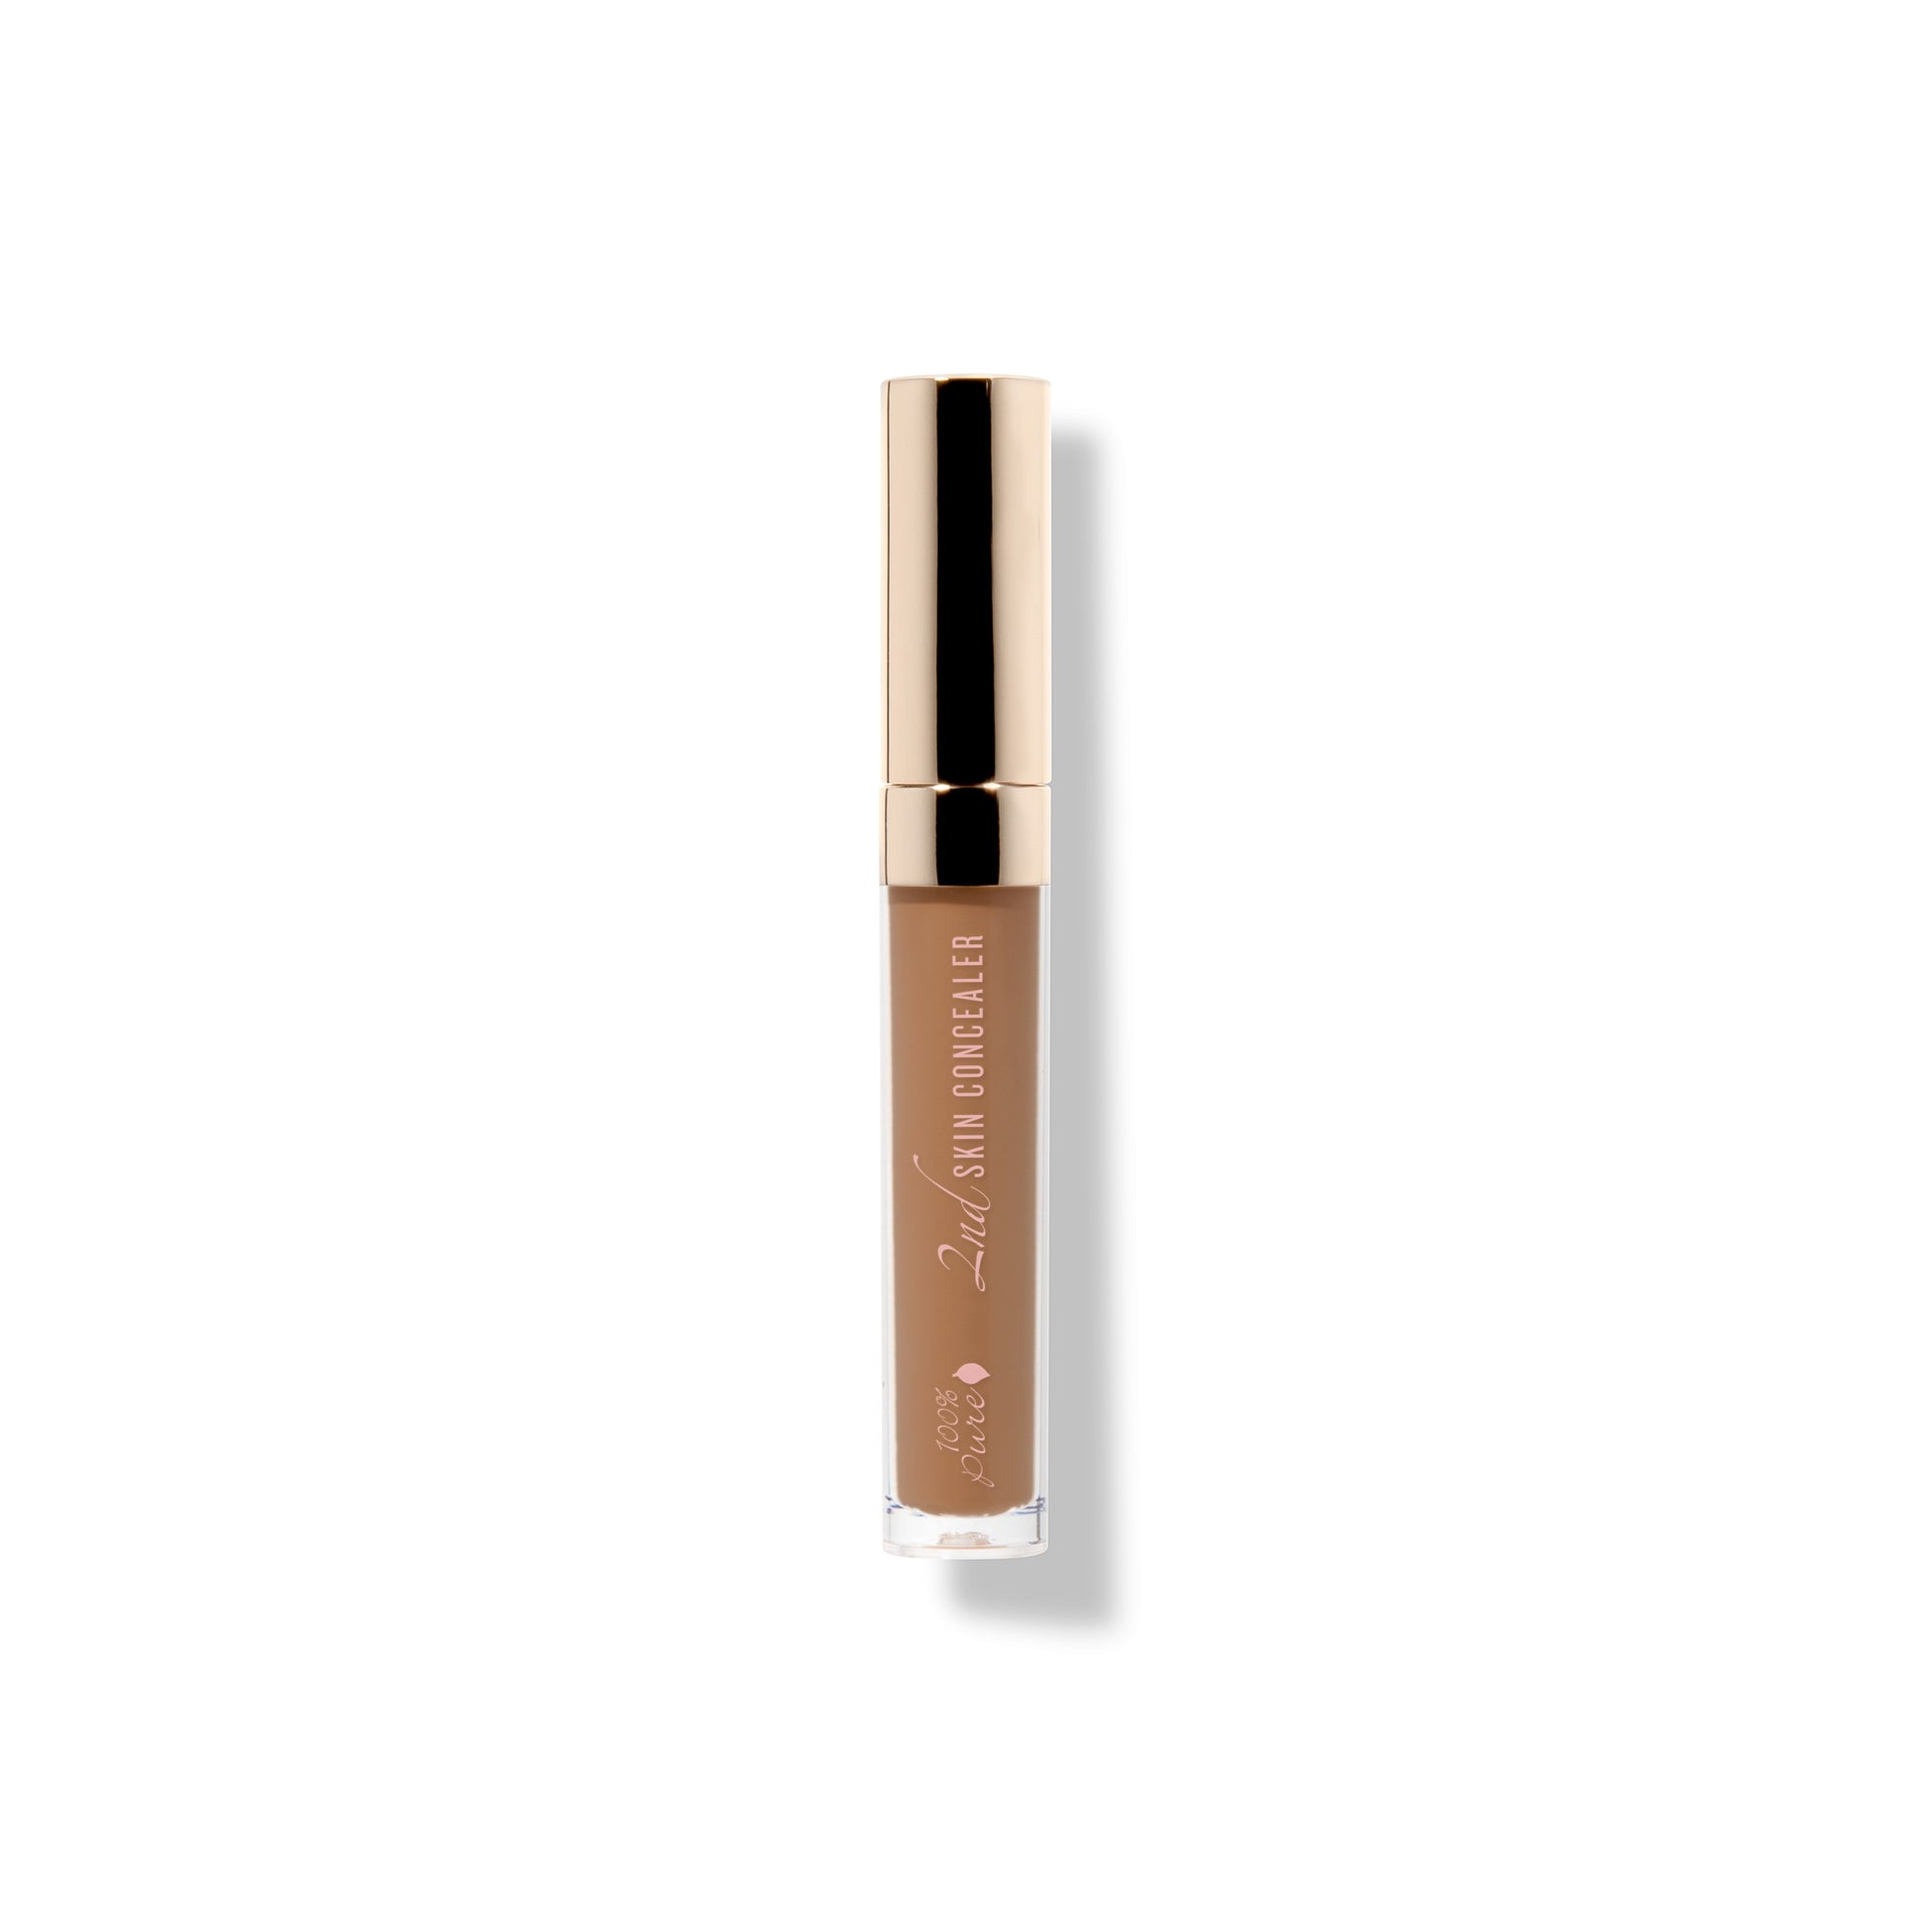 100% PURE Fruit Pigmented 2nd Skin Concealer shade 6